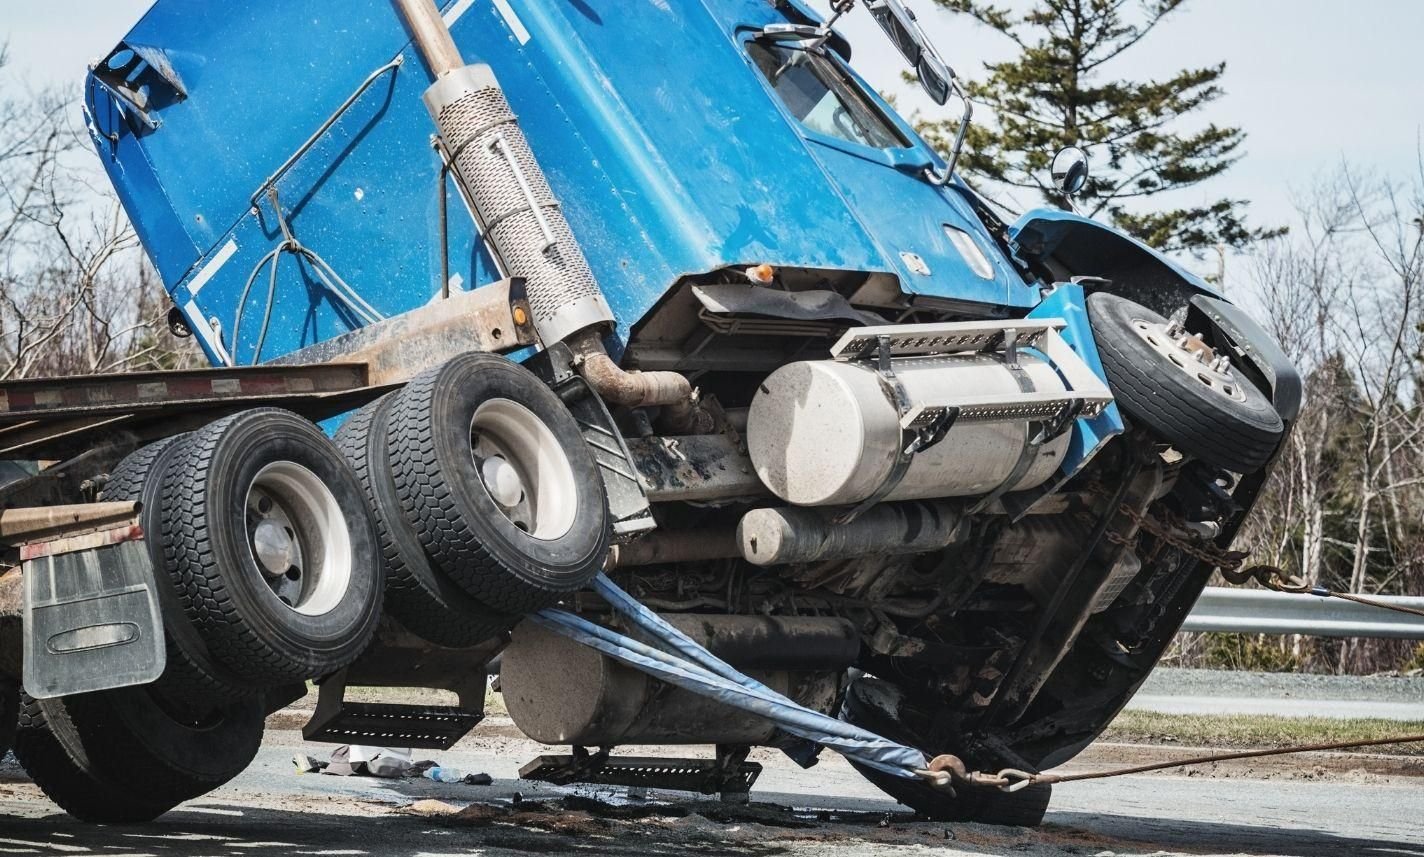 royston-commercial-truck-accident-injury-lawyer